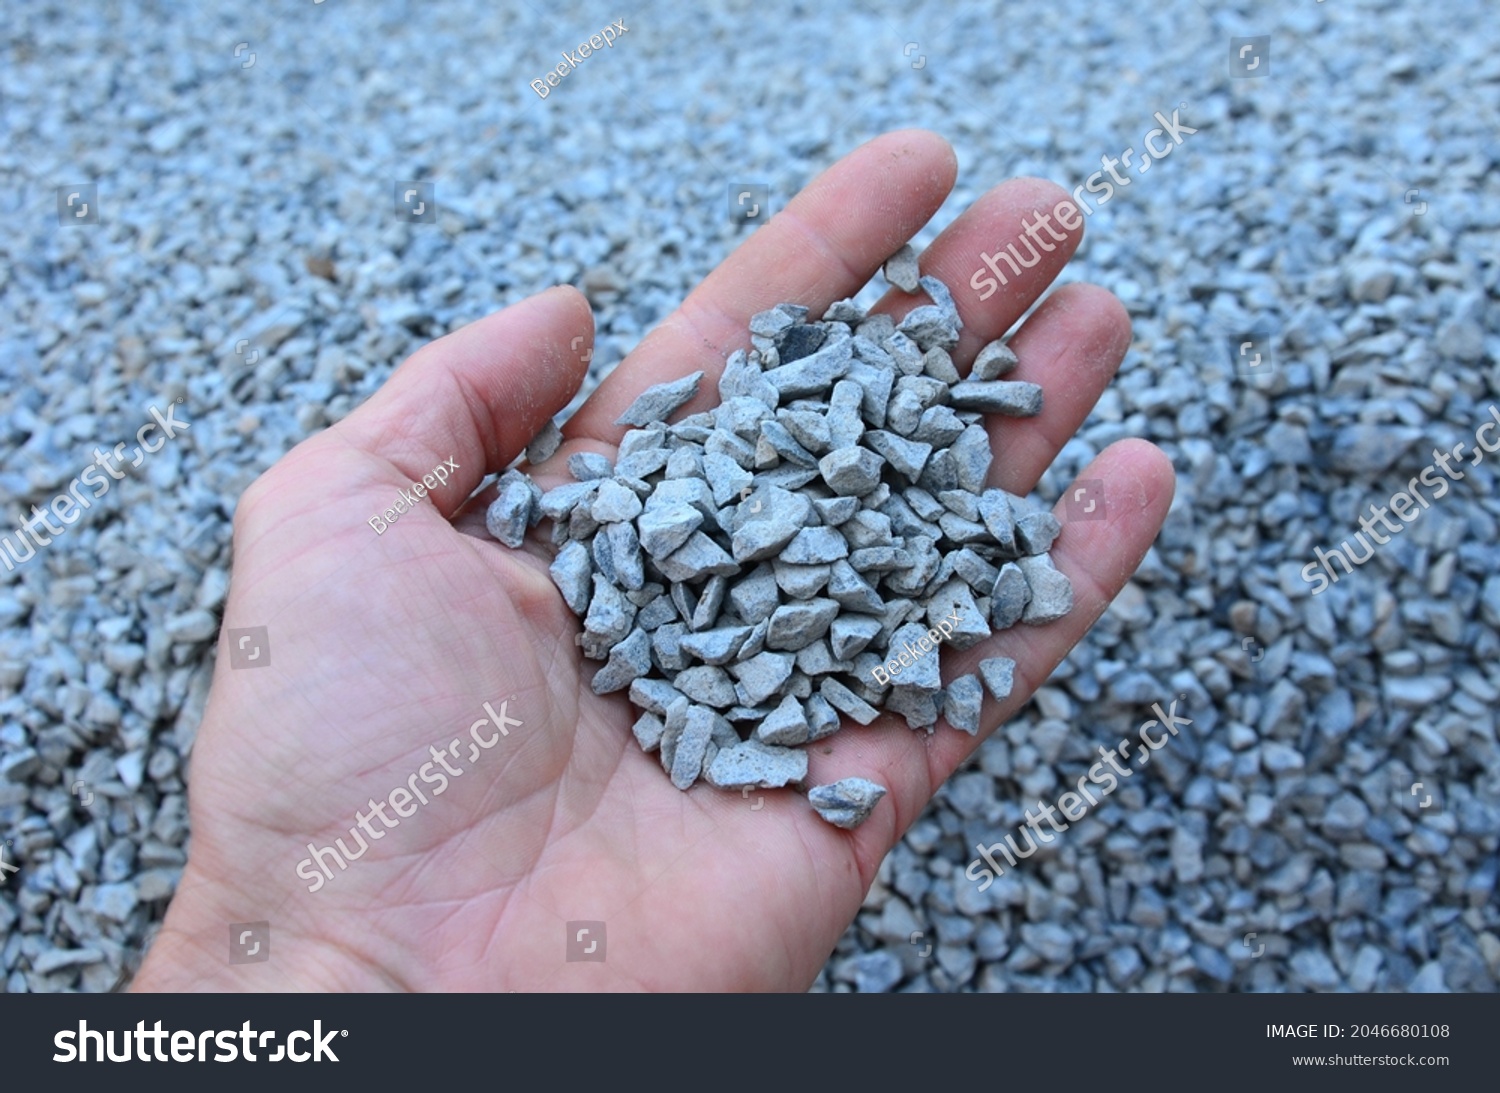 man holds in his hand a sample of stone gravel or pebbles of one size. Marble white gravel and gray brown pebbles straight from the quarry. #2046680108